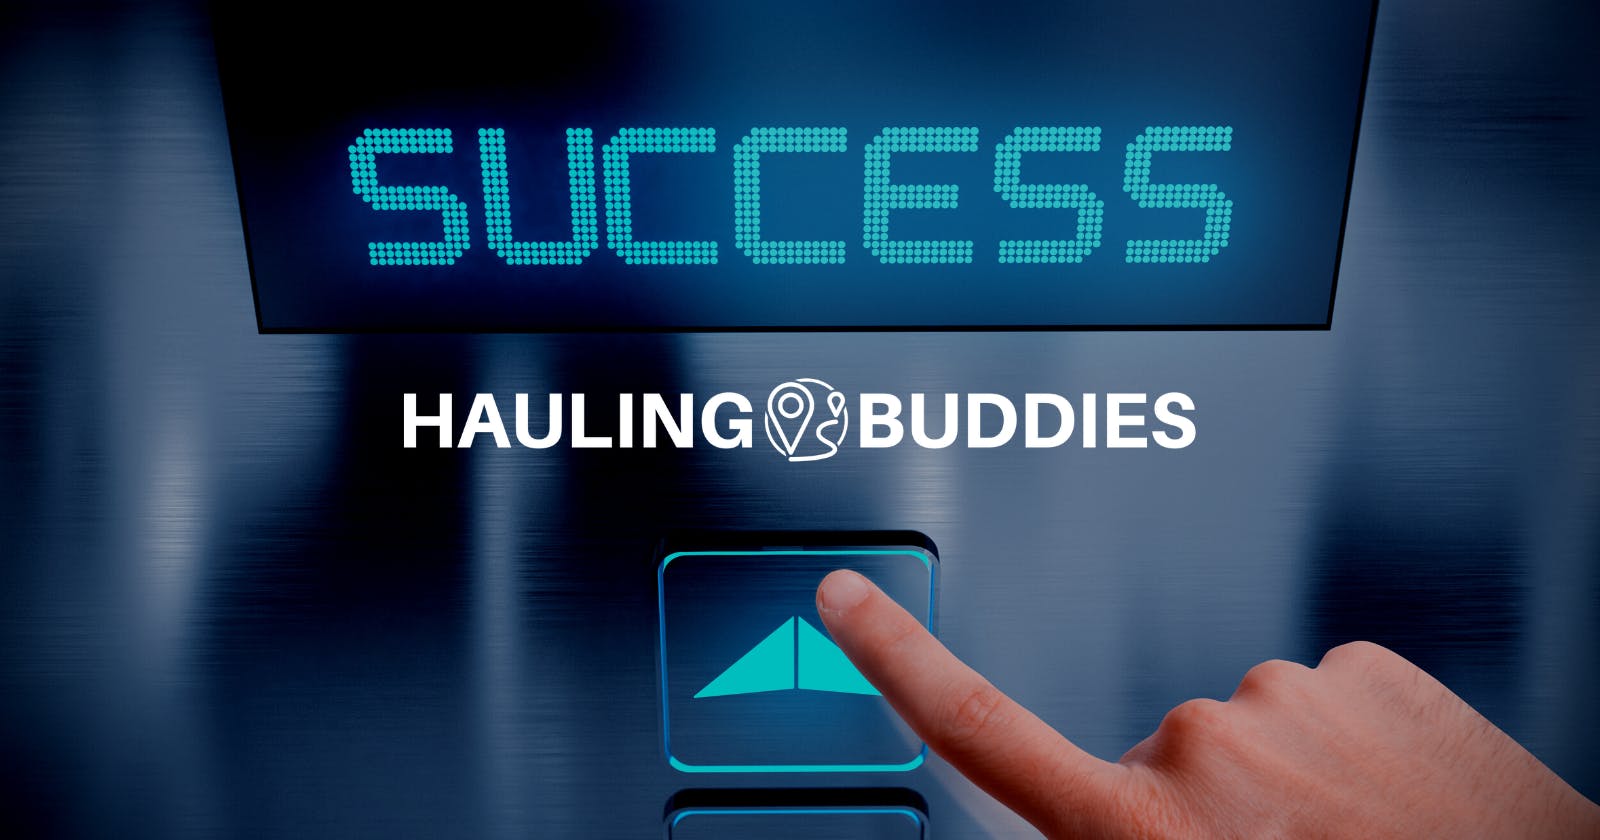 Elevating Your Animal Transport Business: The Hauling Buddies Way